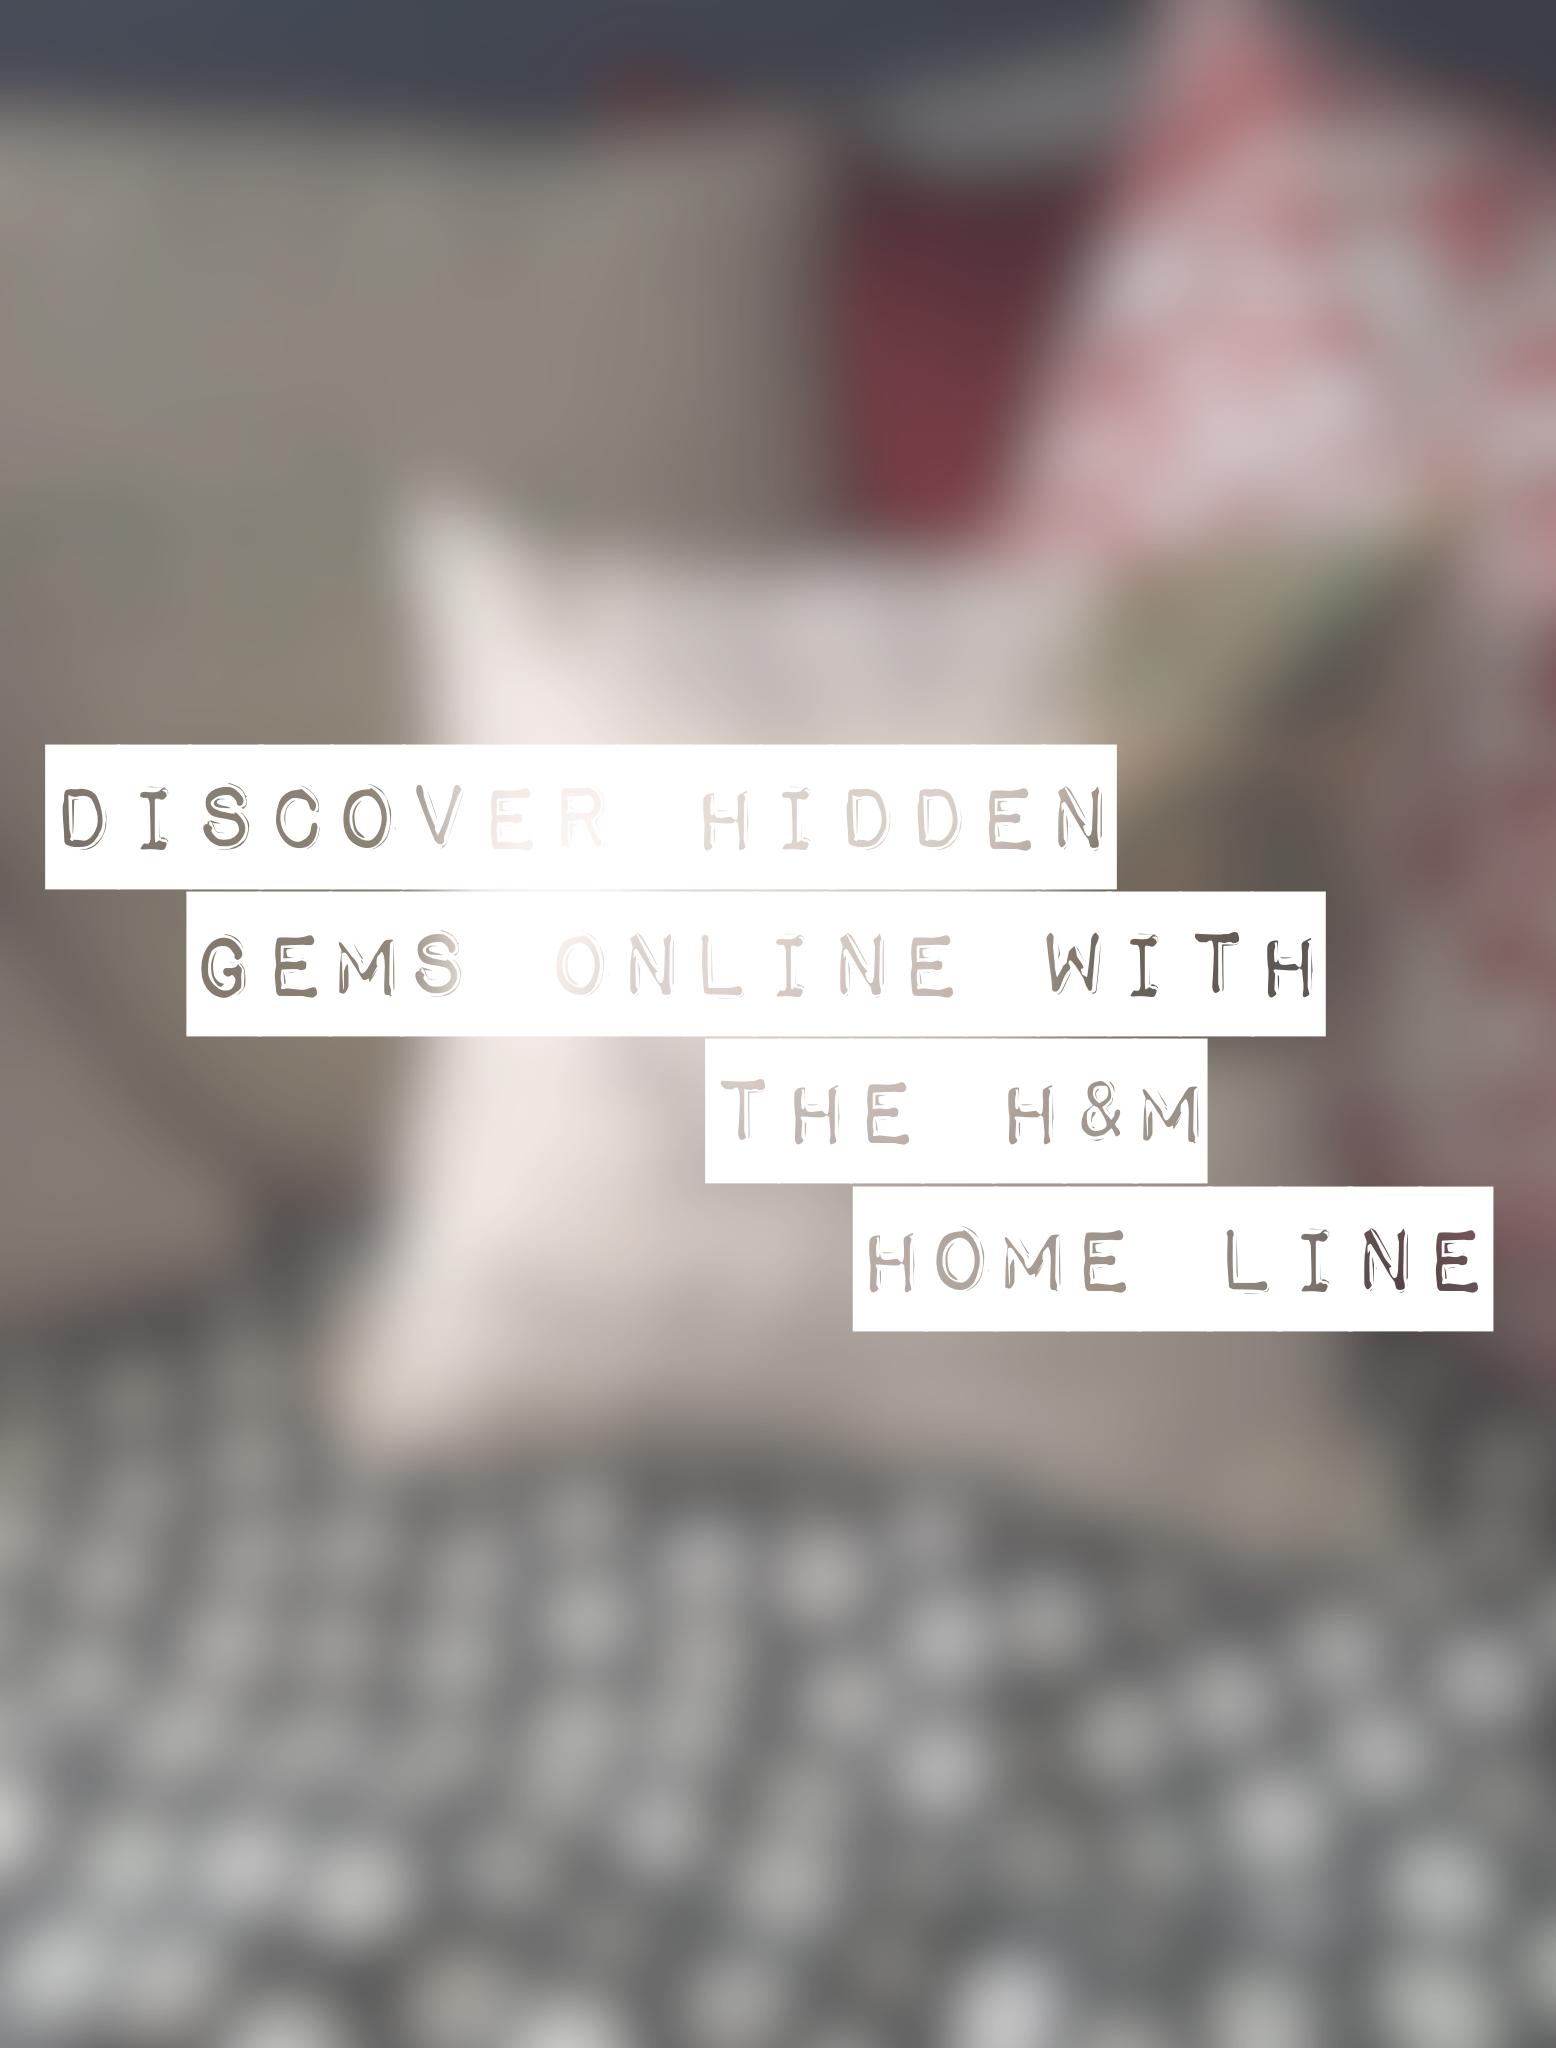 Discover Hidden Gems Online With H&M Home